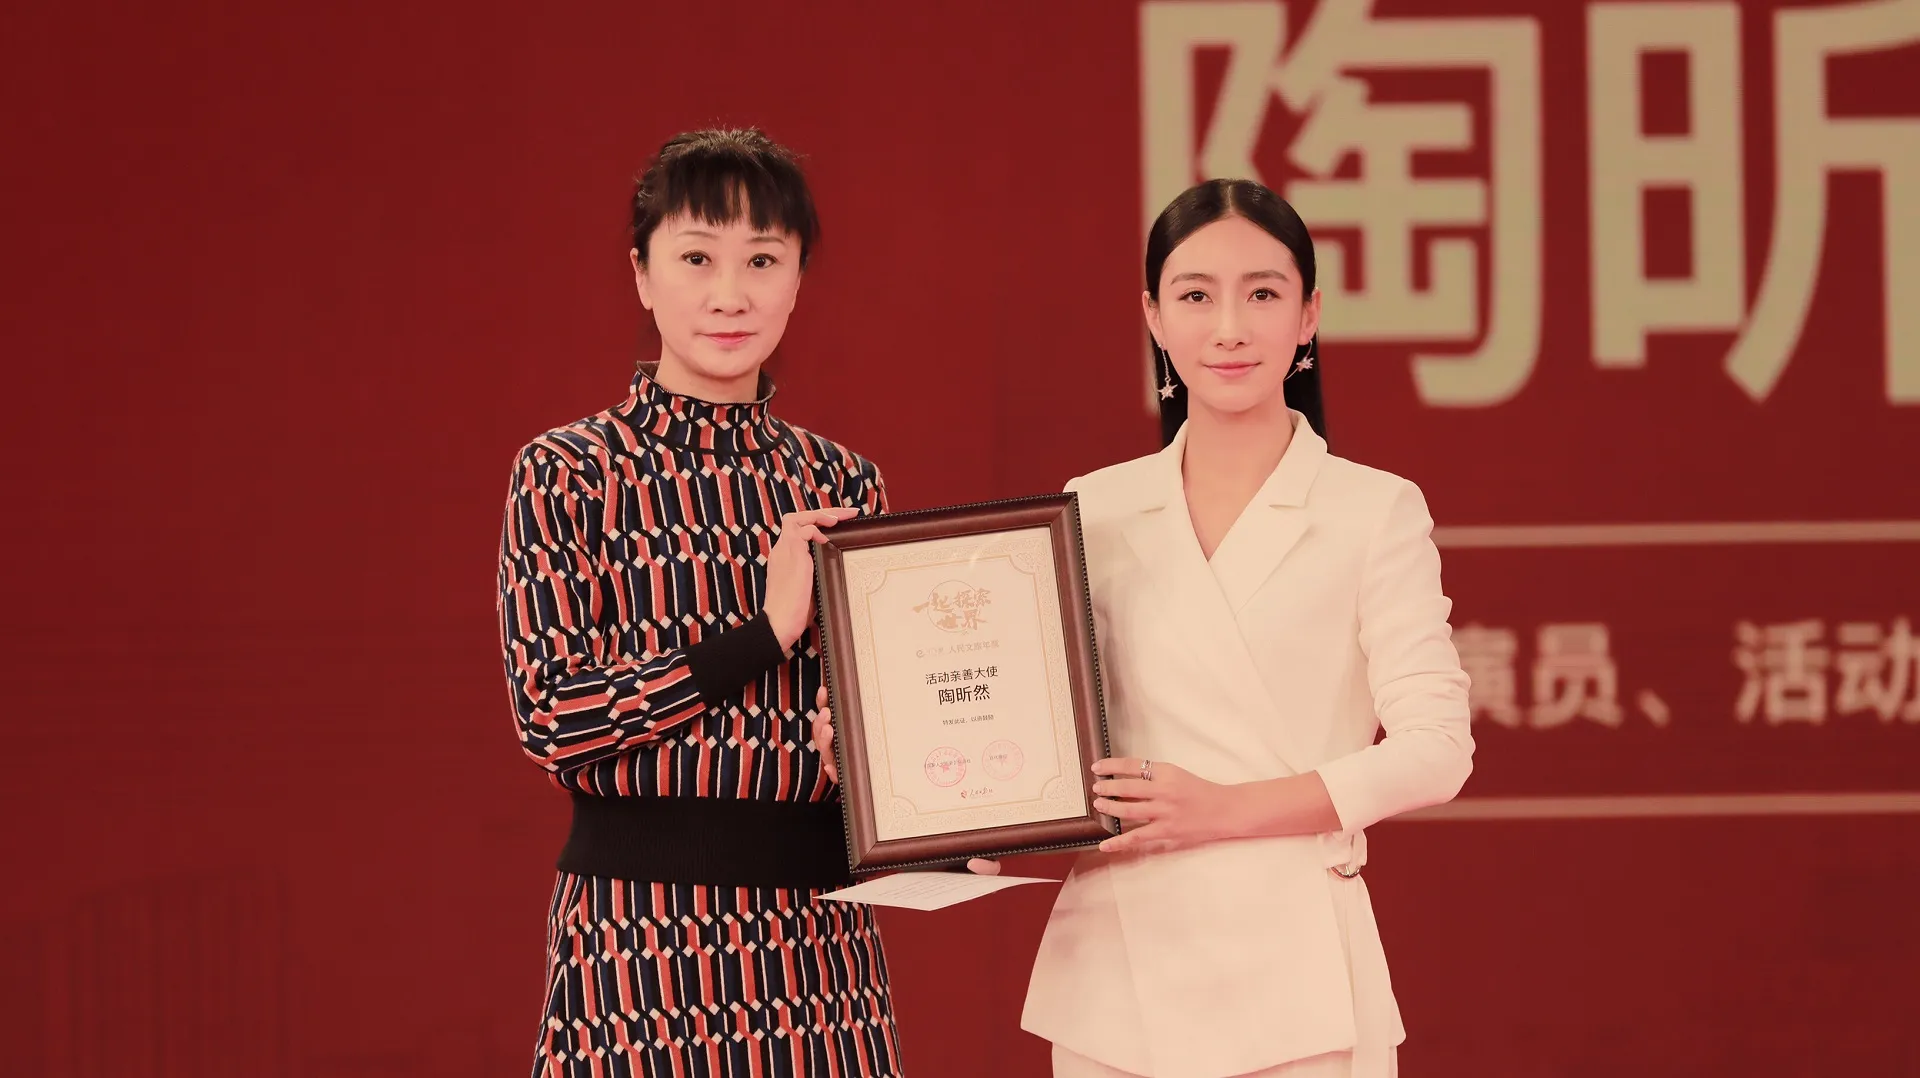 Tao Xinran was awarded the 